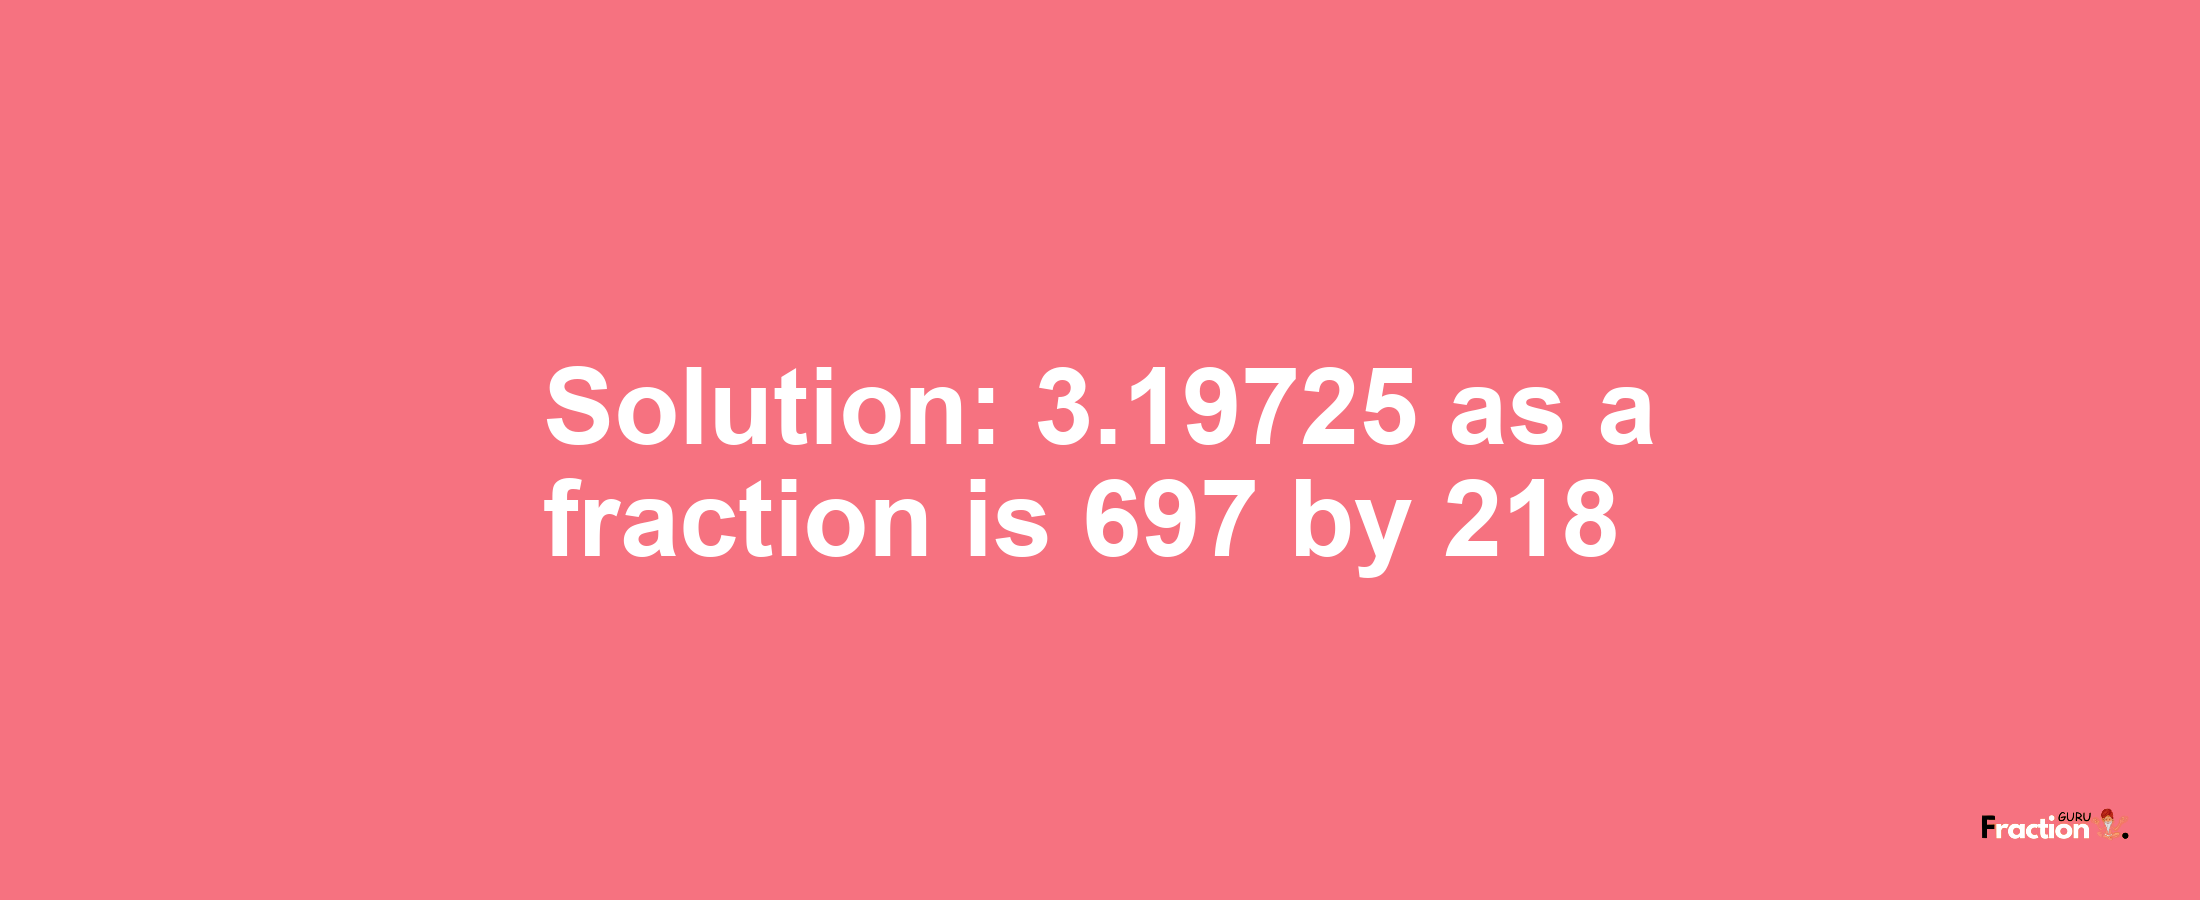 Solution:3.19725 as a fraction is 697/218